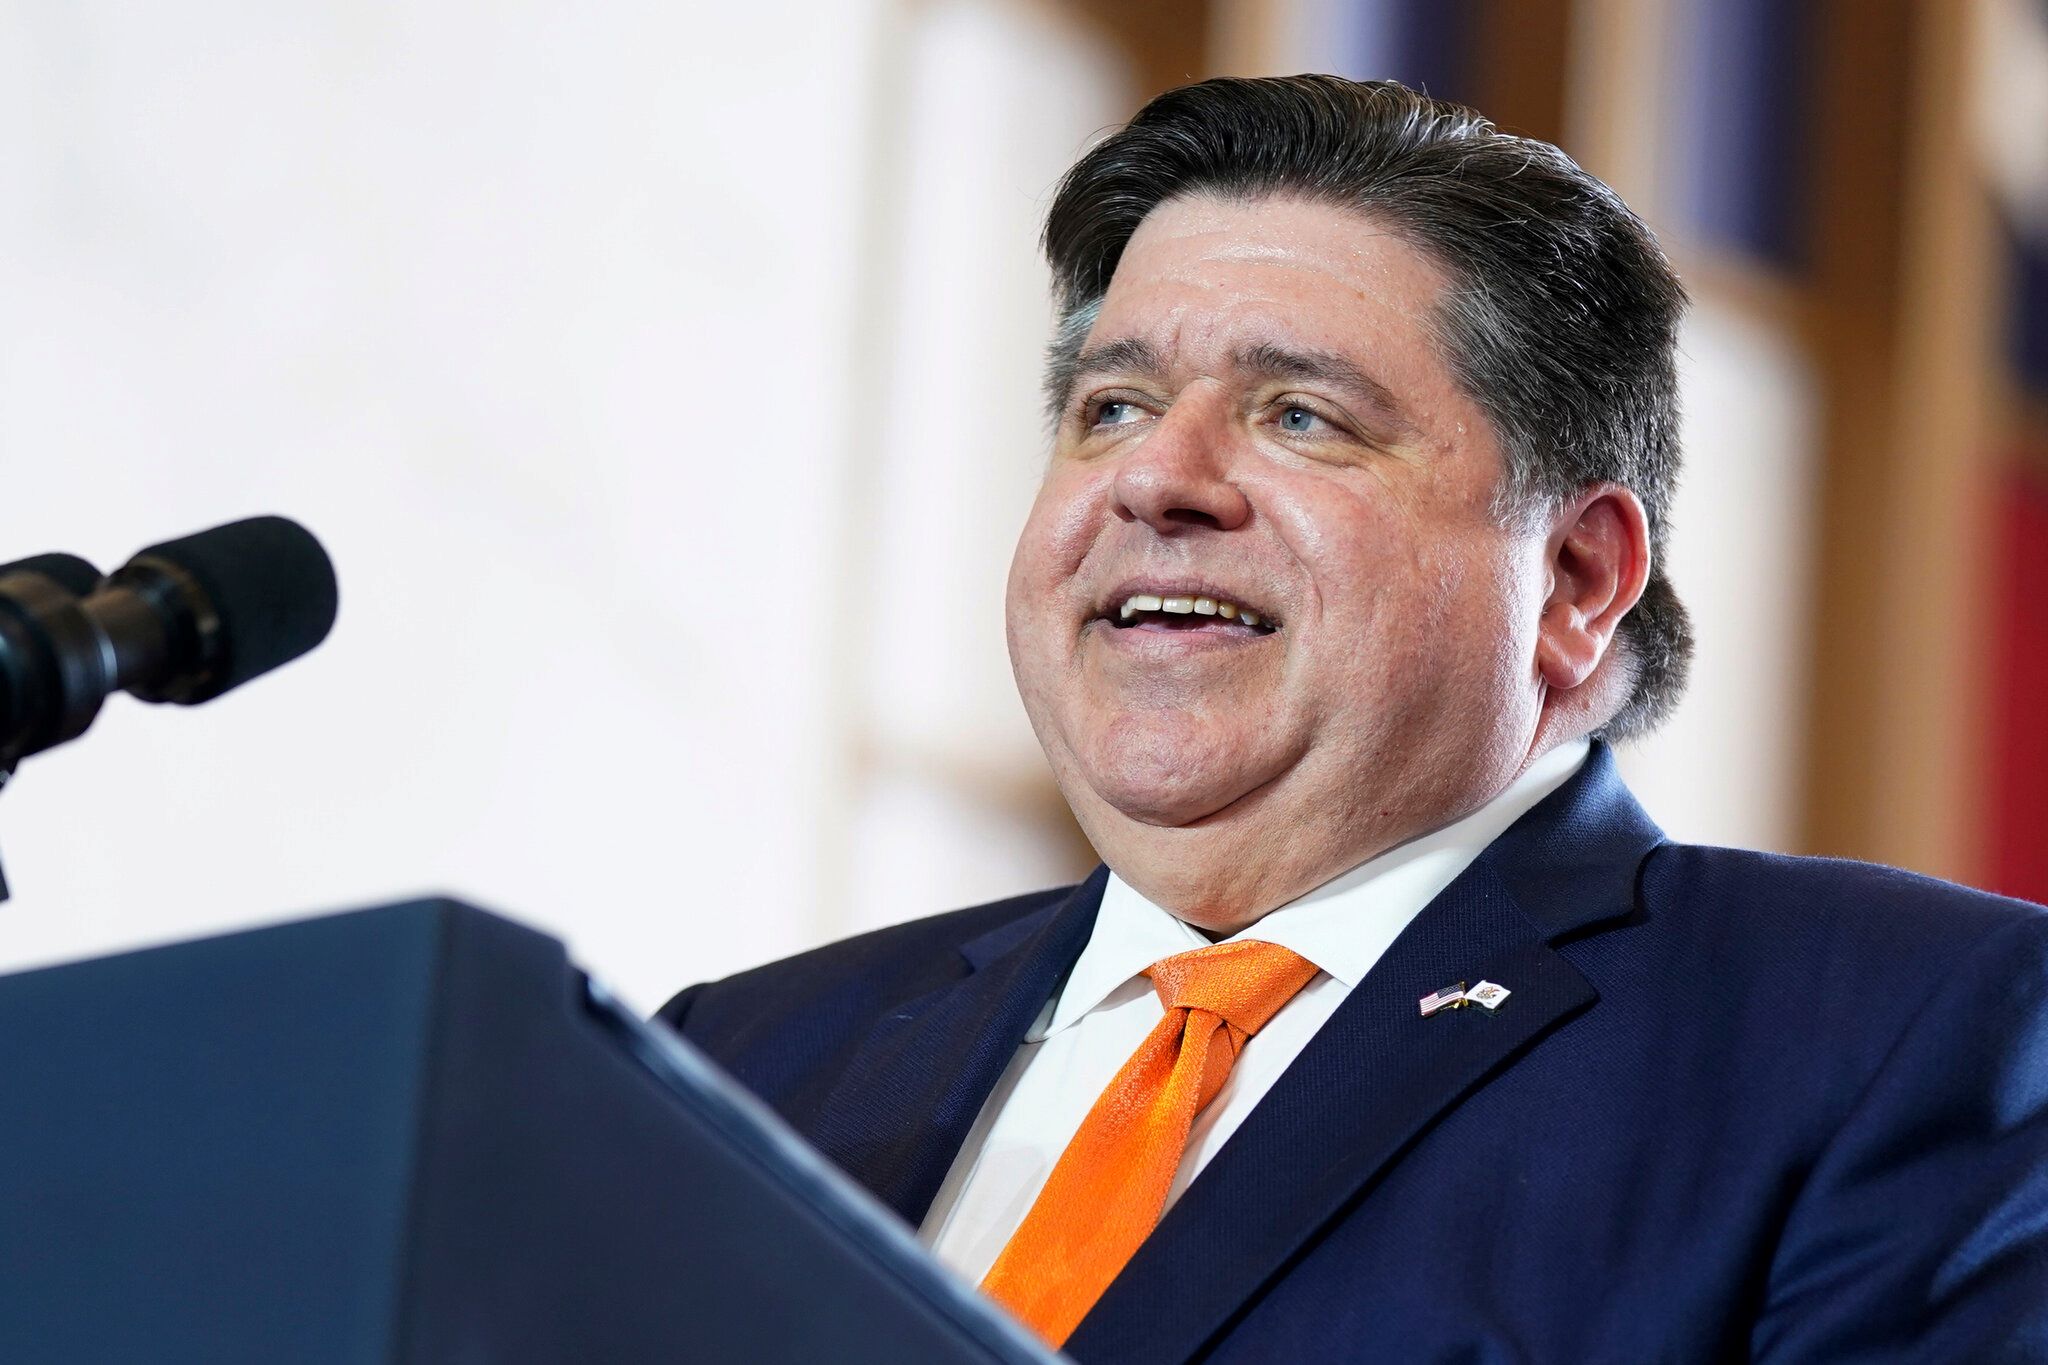 24-mind-blowing-facts-about-john-a-pritzker